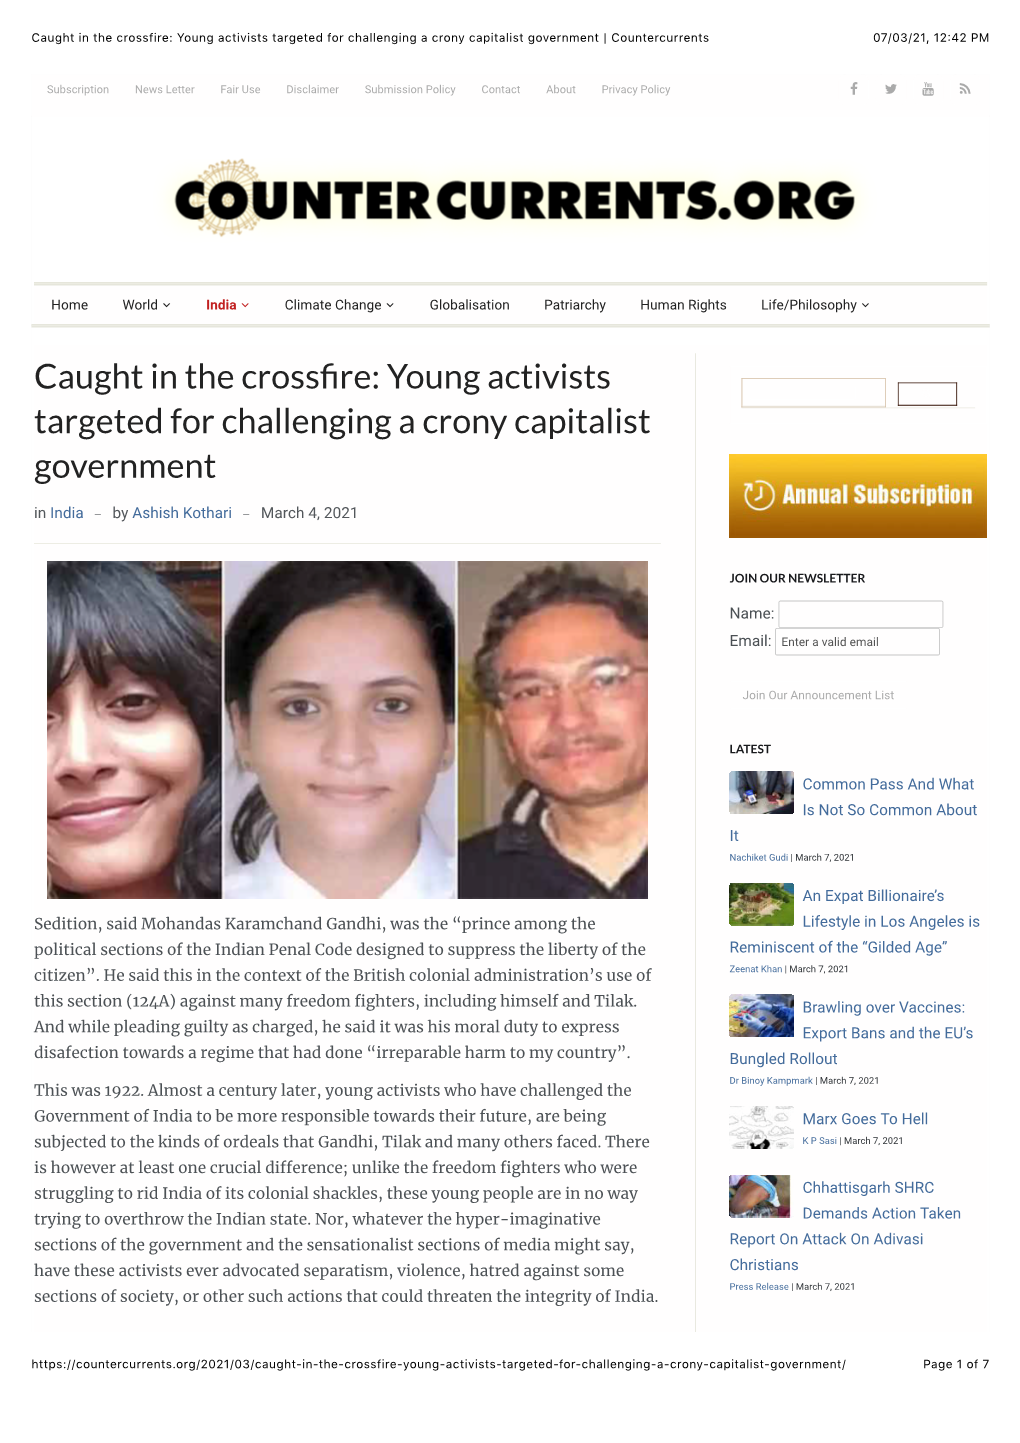 Caught in the Crossfire: Young Activists Targeted for Challenging a Crony Capitalist Government | Countercurrents 07/03/21, 12�42 PM